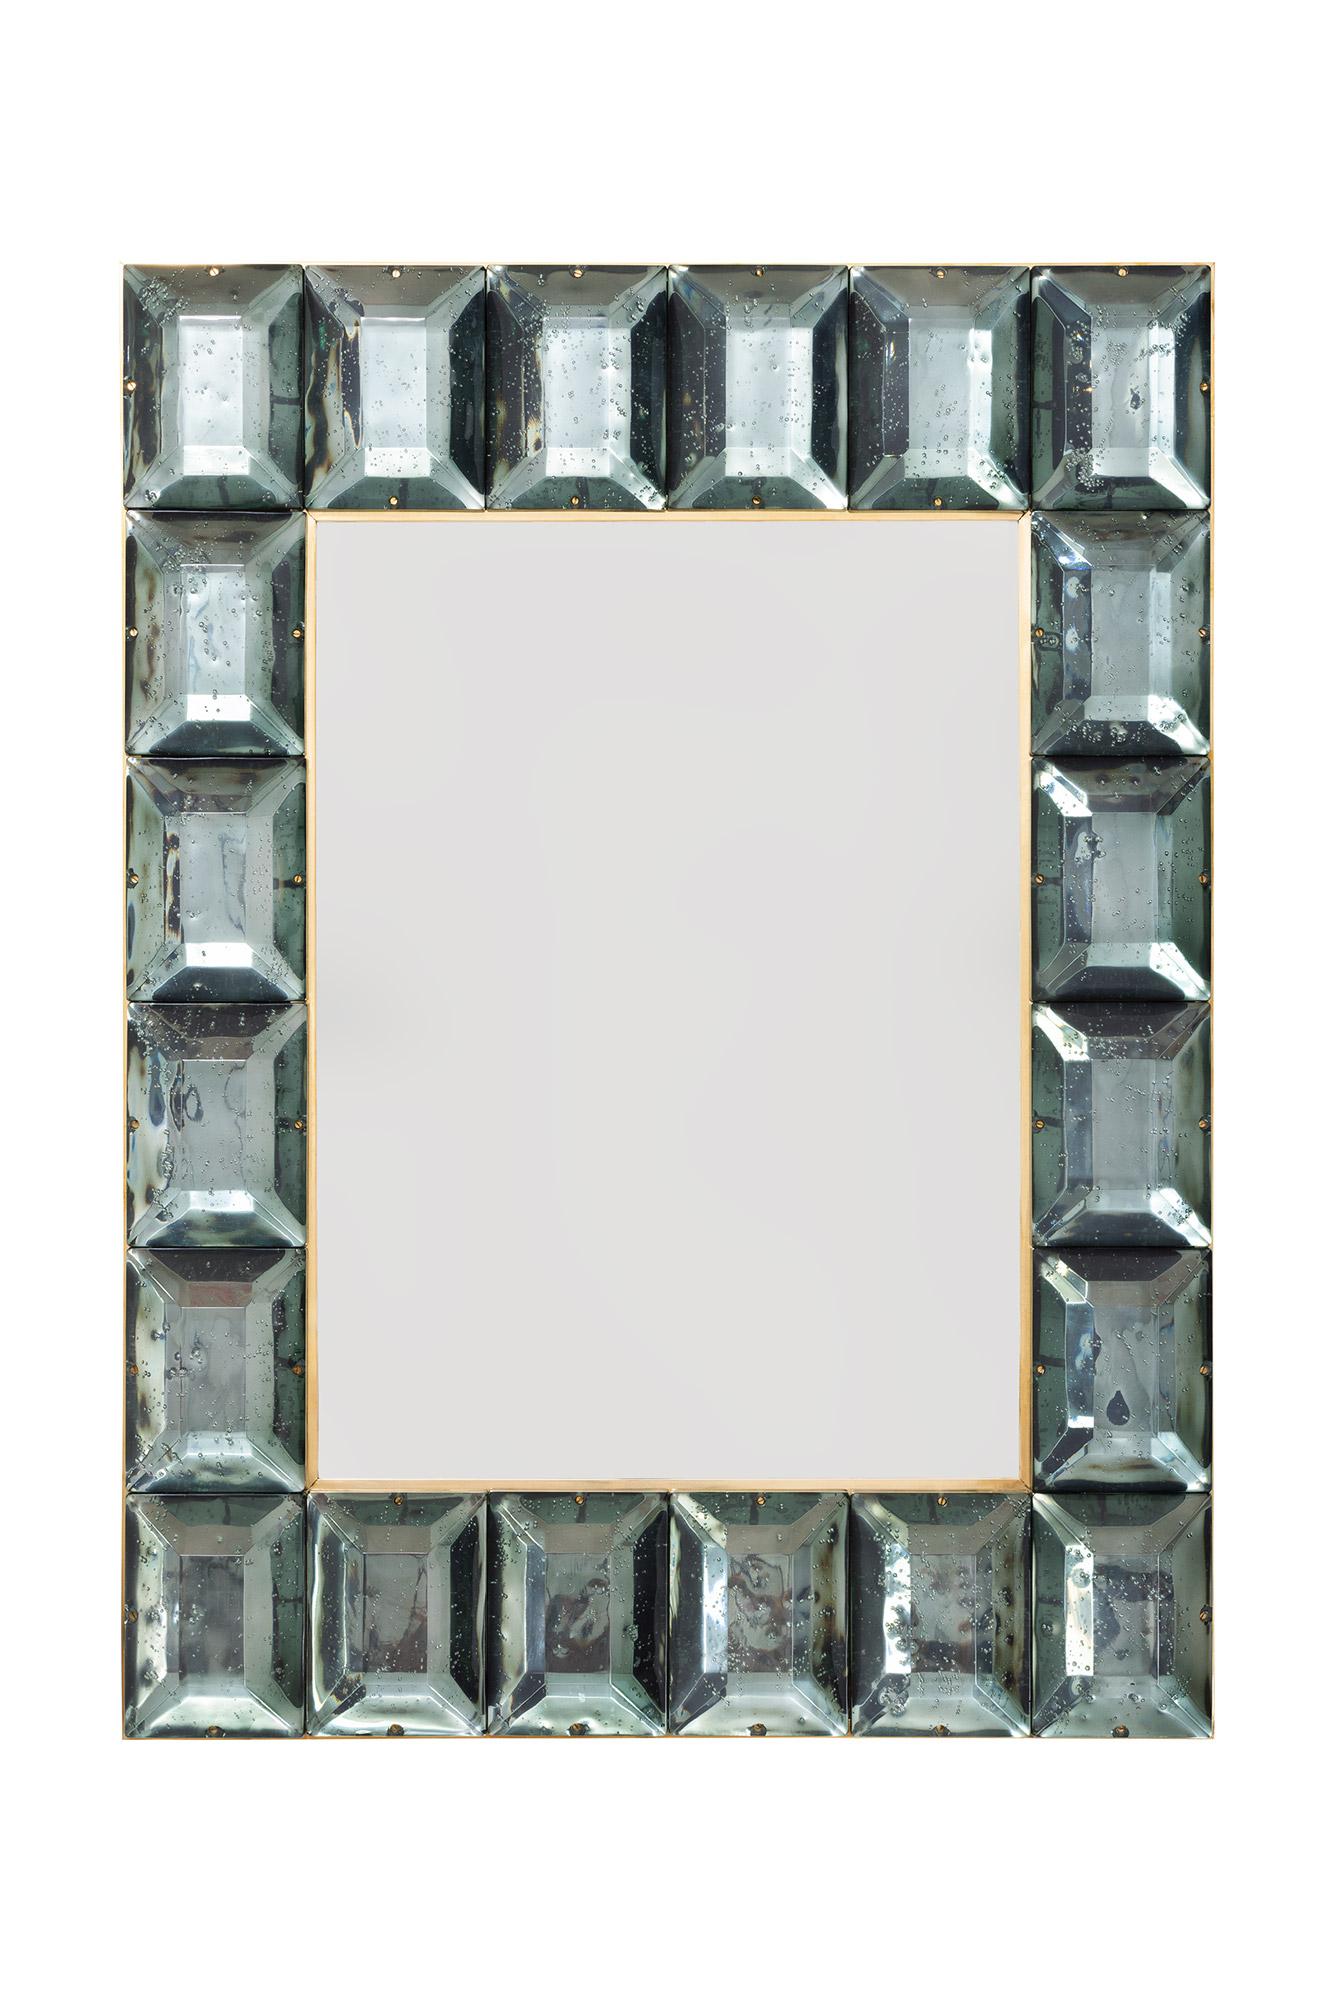  Pair of contemporary sea green diamond Murano glass block mirror, in stock
Customizable, faceted Murano glass frame mirror, edged in brass and  luxury handcrafted by a team of artisans in Venice, Italy. Each sea green, aqua glass block has a highly